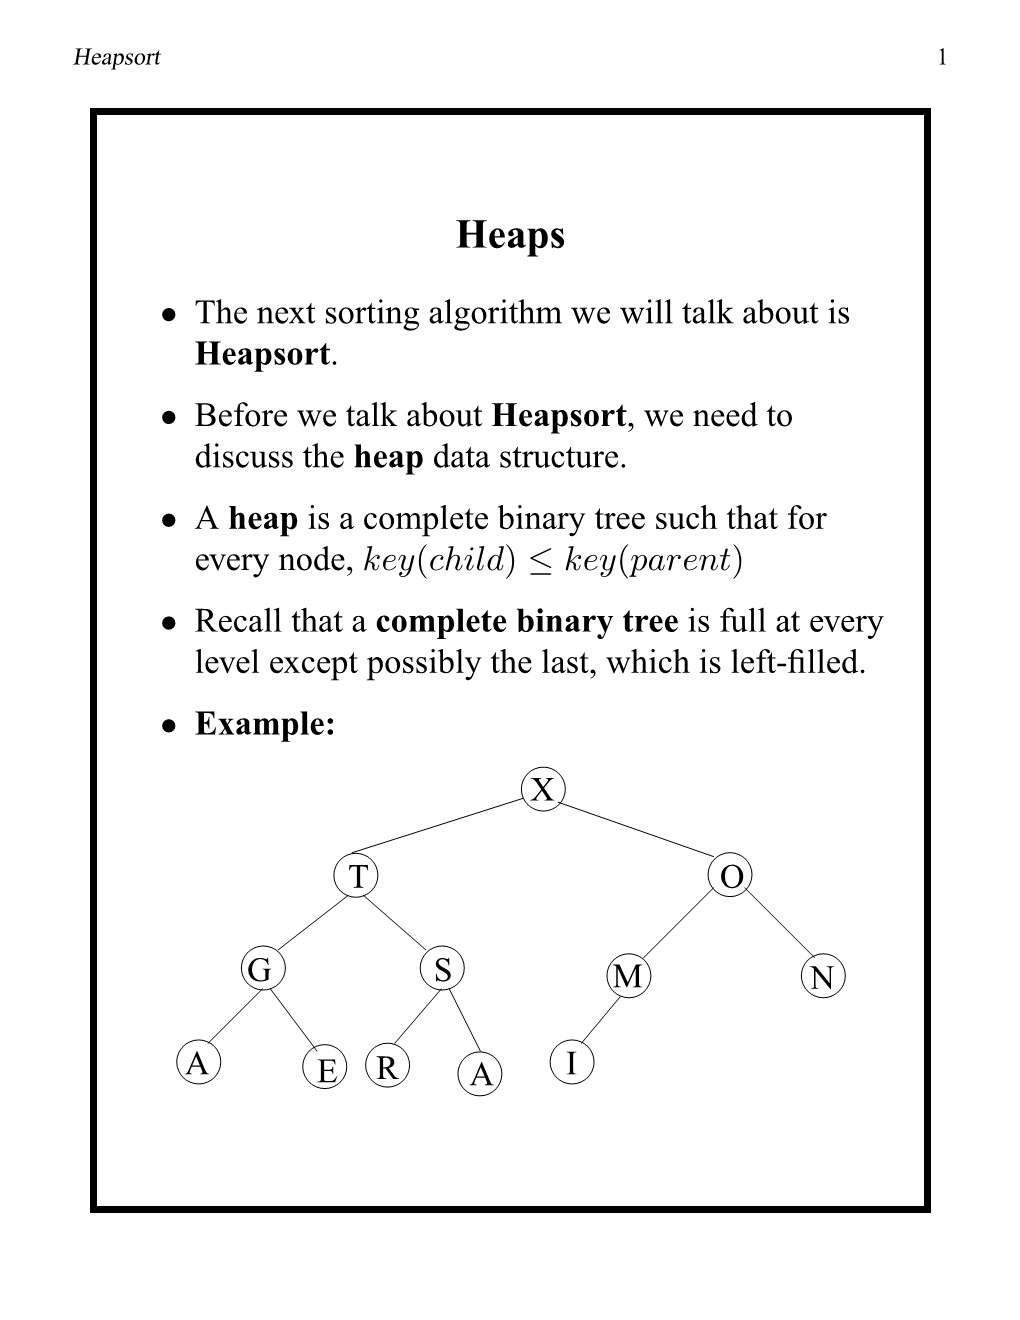 • the Next Sorting Algorithm We Will Talk About Is Heapsort. • Before We Talk About Heapsort, We Need to Discuss the Heap Data Structure